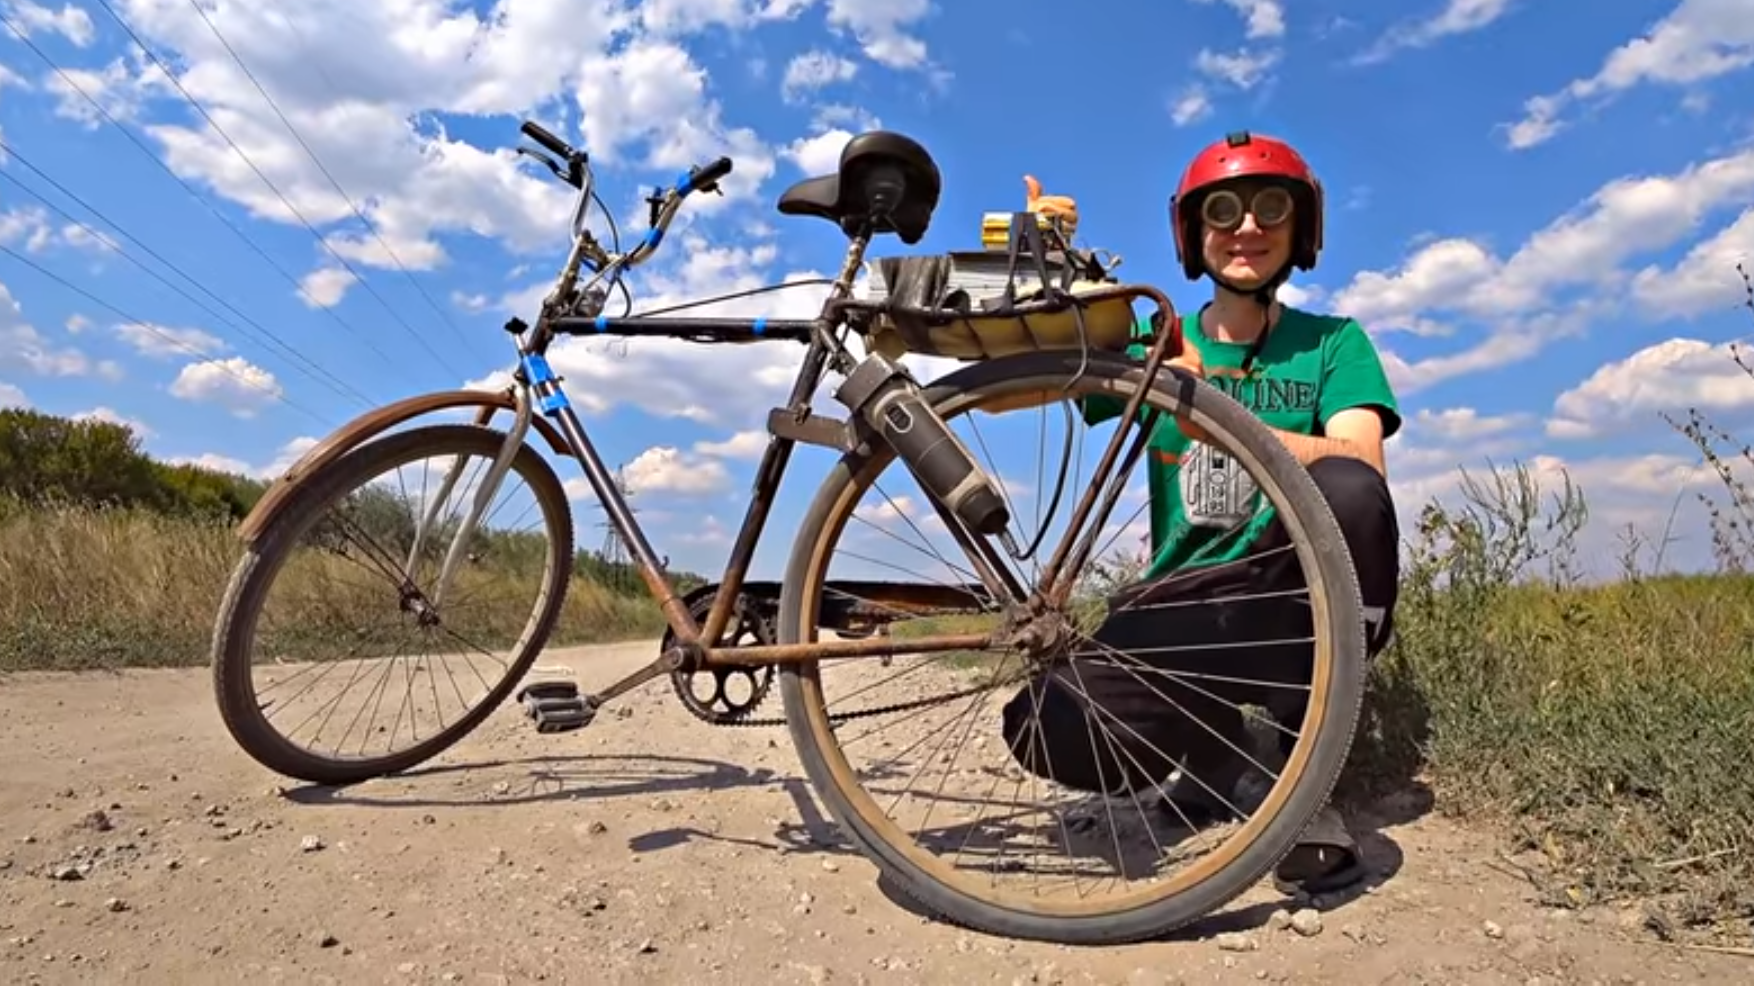 Possibly The Most UpCycled, Hacked EBike You’ll See All Week Hackaday